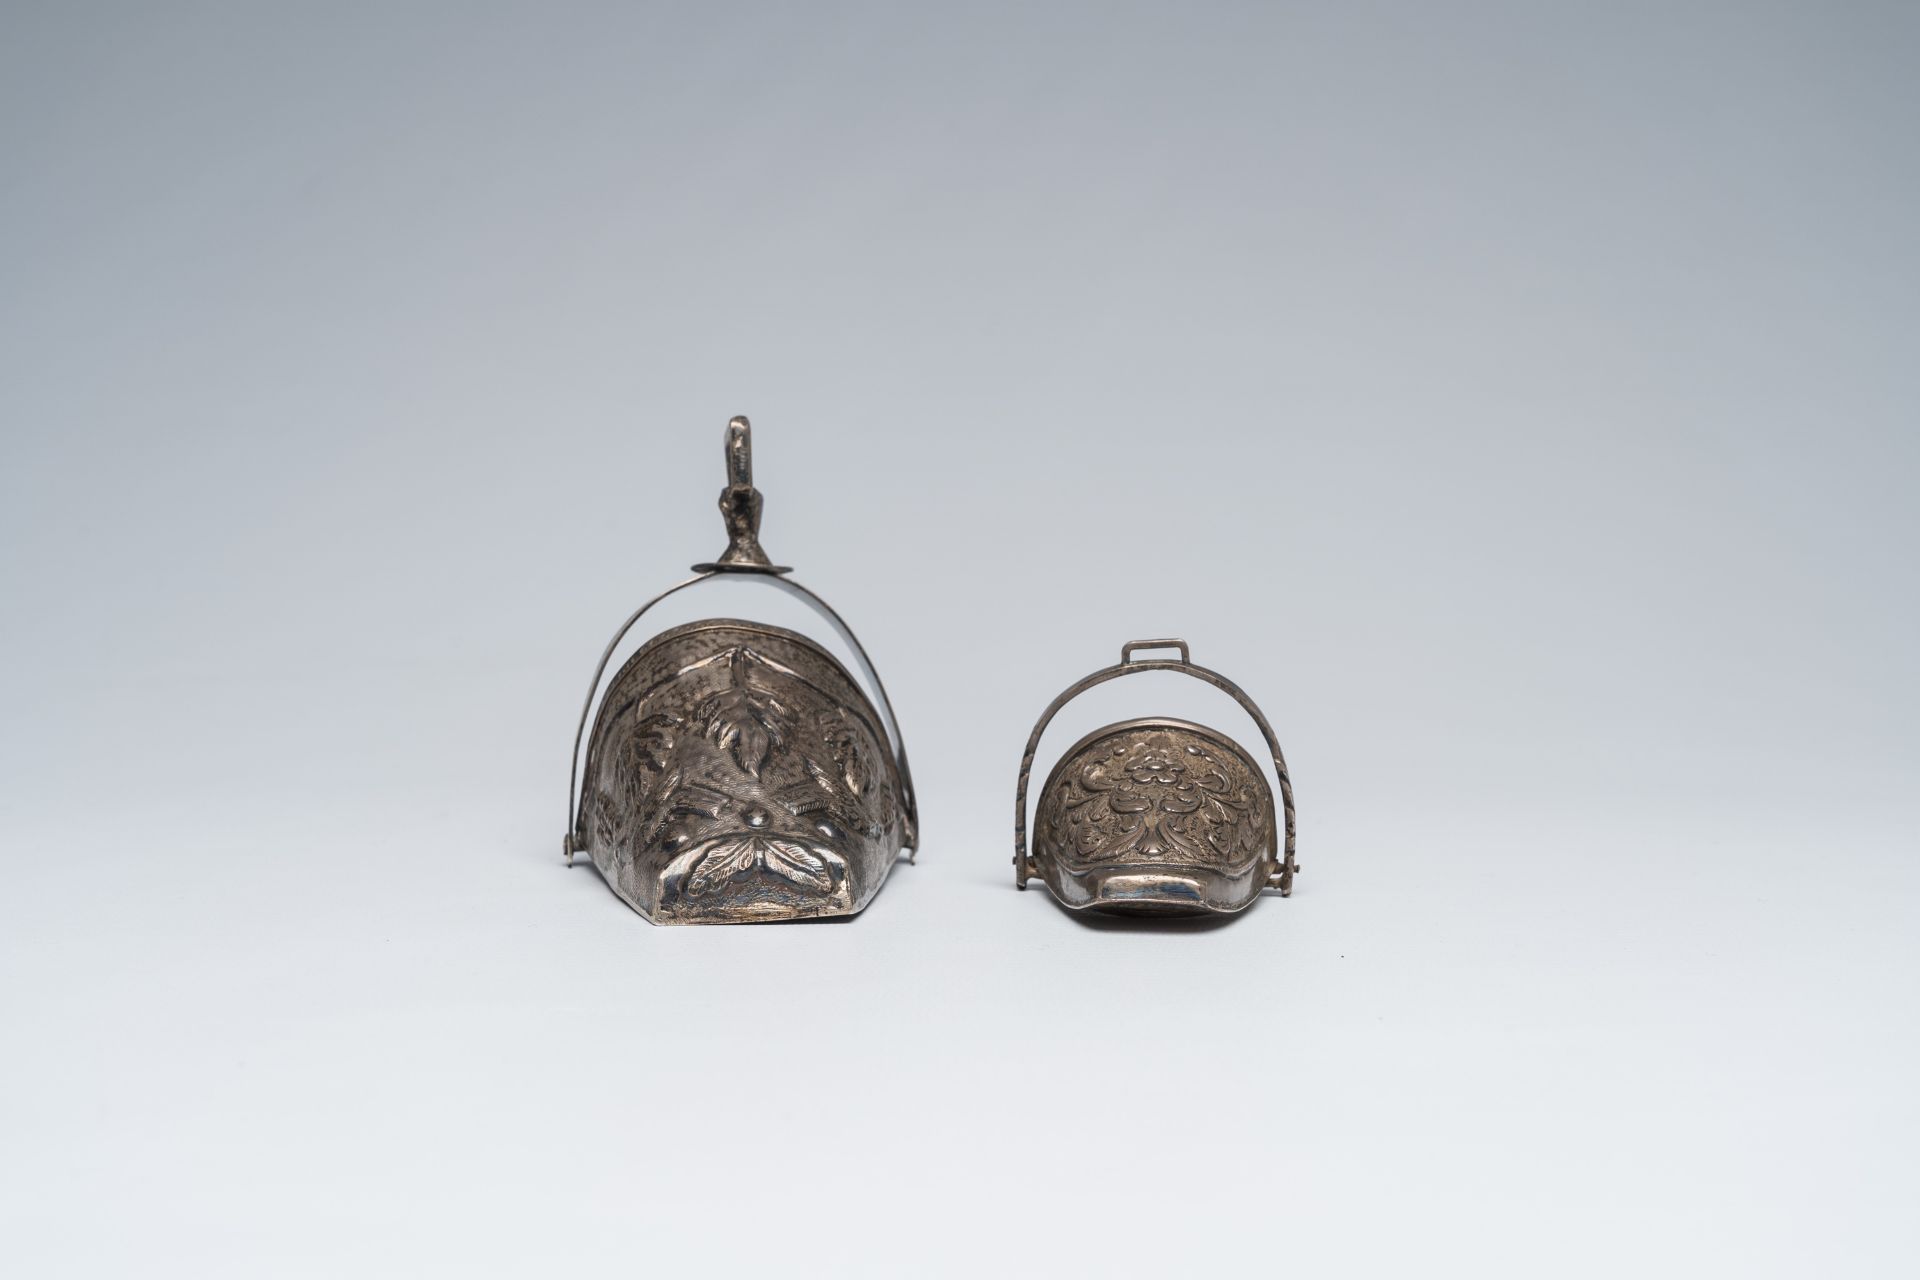 Two Peruvian silver stirrups with floral design, 925/000, 20th C. - Image 5 of 8